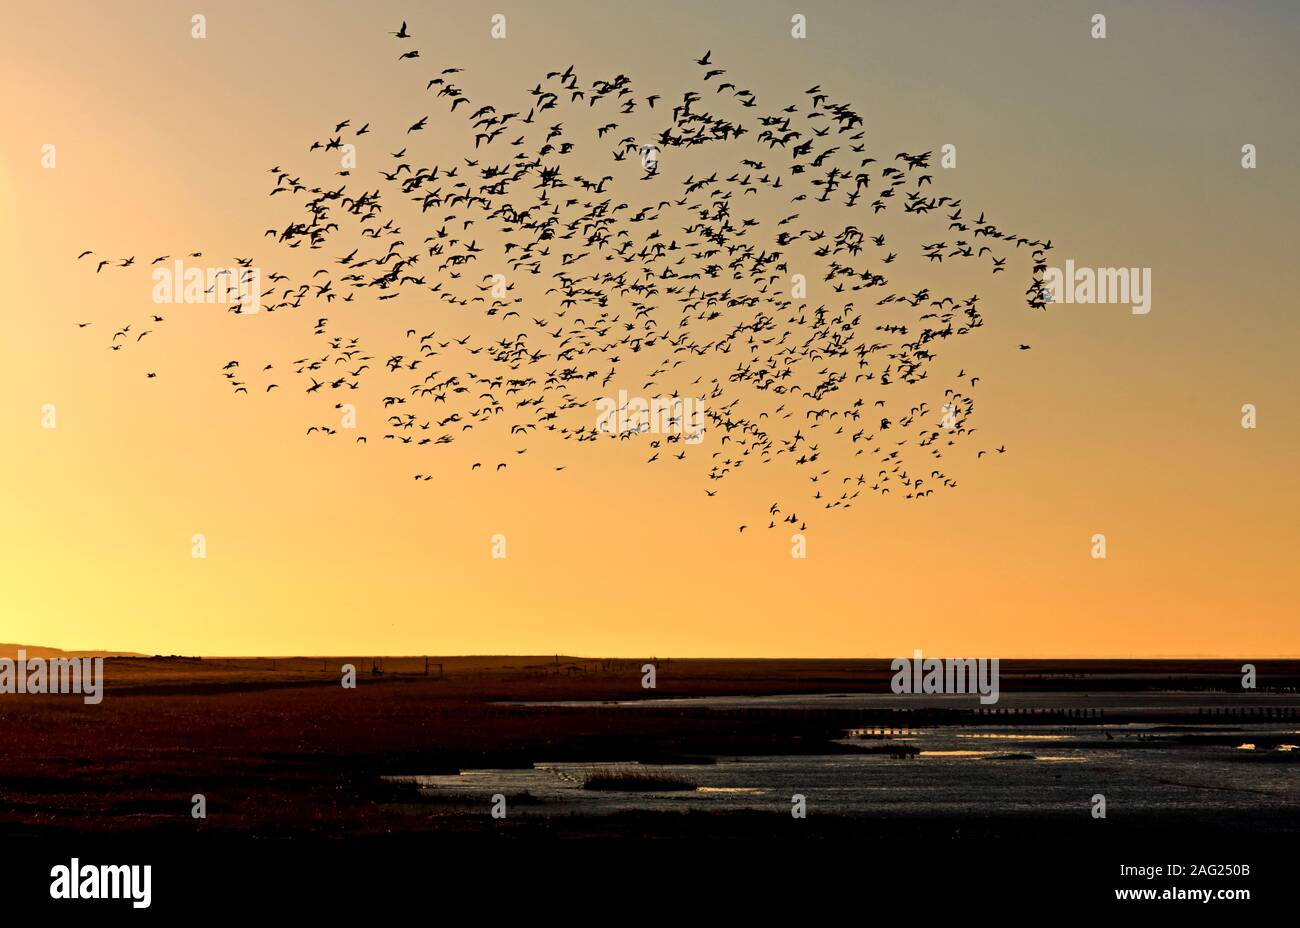 An impressive number of seabirds were seen on the North Sea during the sunset. Stock Photo